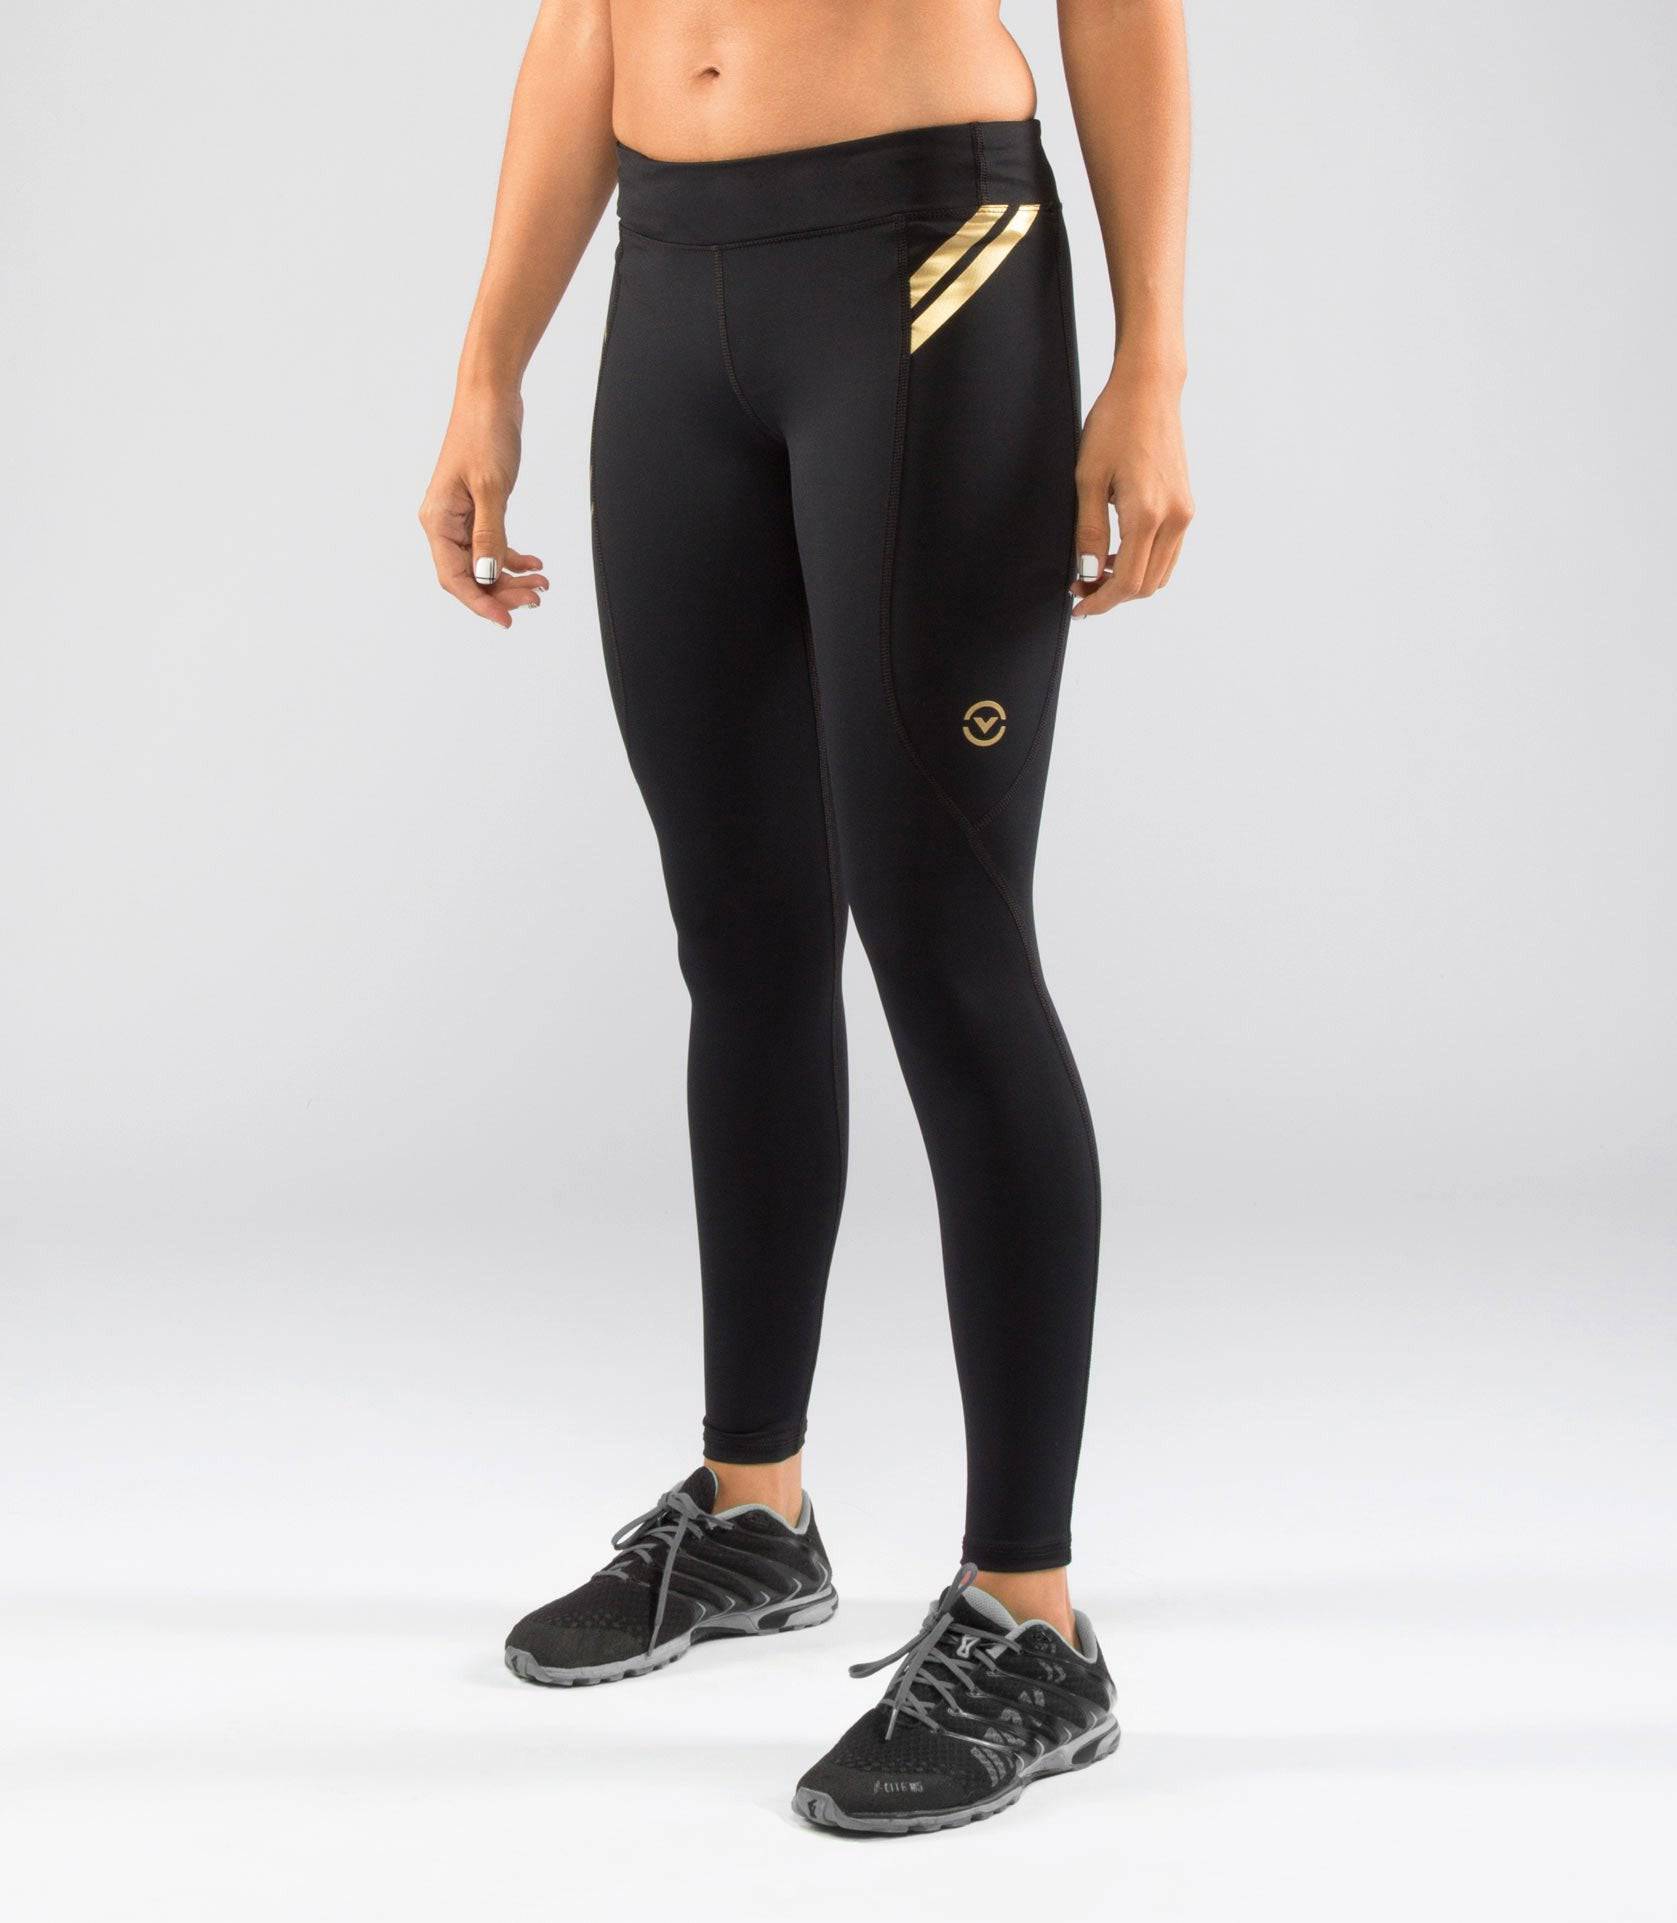 KL1 Active Recovery Pants – VIRUS Oceania